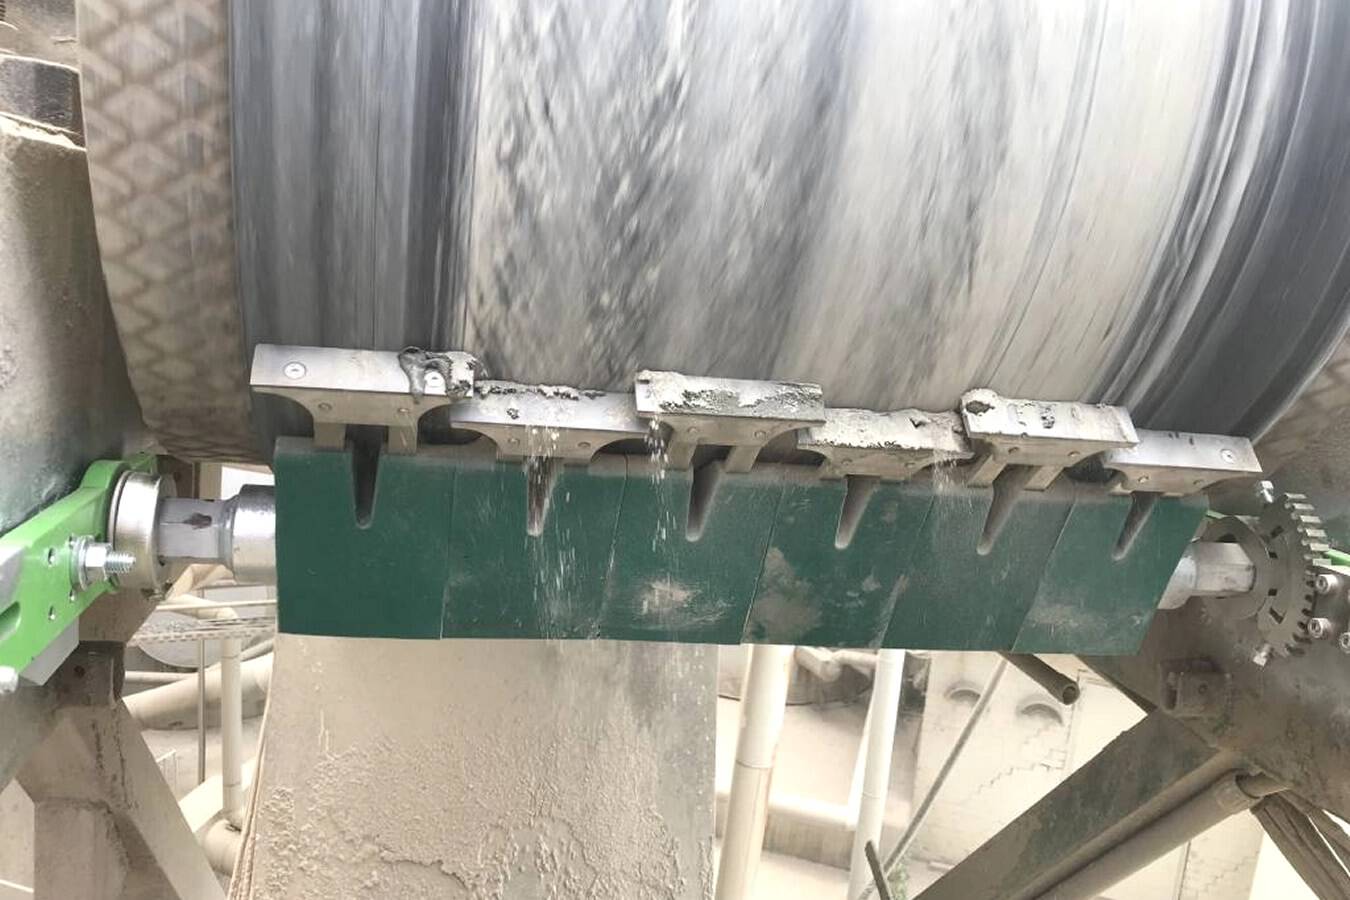 Contamination and downtime conveyor belts minimised at AEB Amsterdam StarClean belt scrapers work very accurately and are less prone to wear, says François van den Hoek, installation manager of separation plant at AEB Amsterdam.